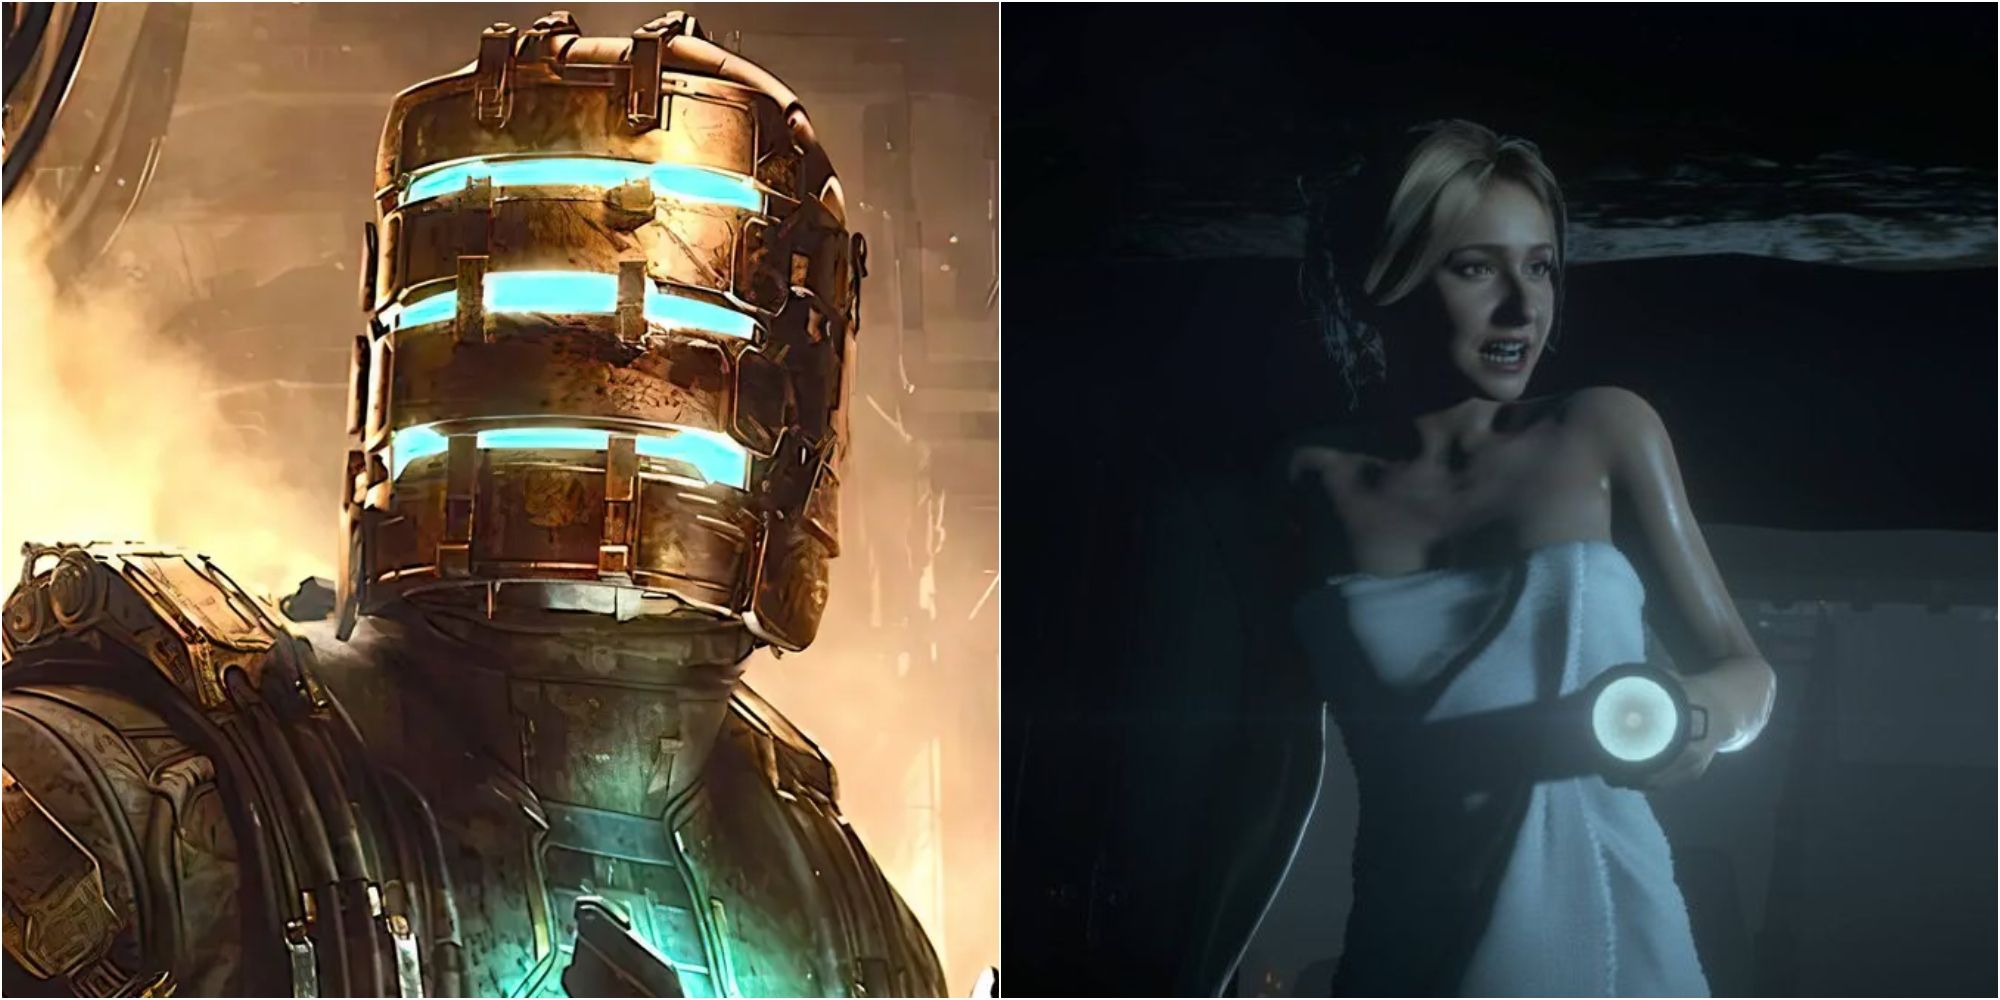 Isaac from Dead Space with his copper helmet on, next to Sam from Until Dawn in her towel with a flashlight